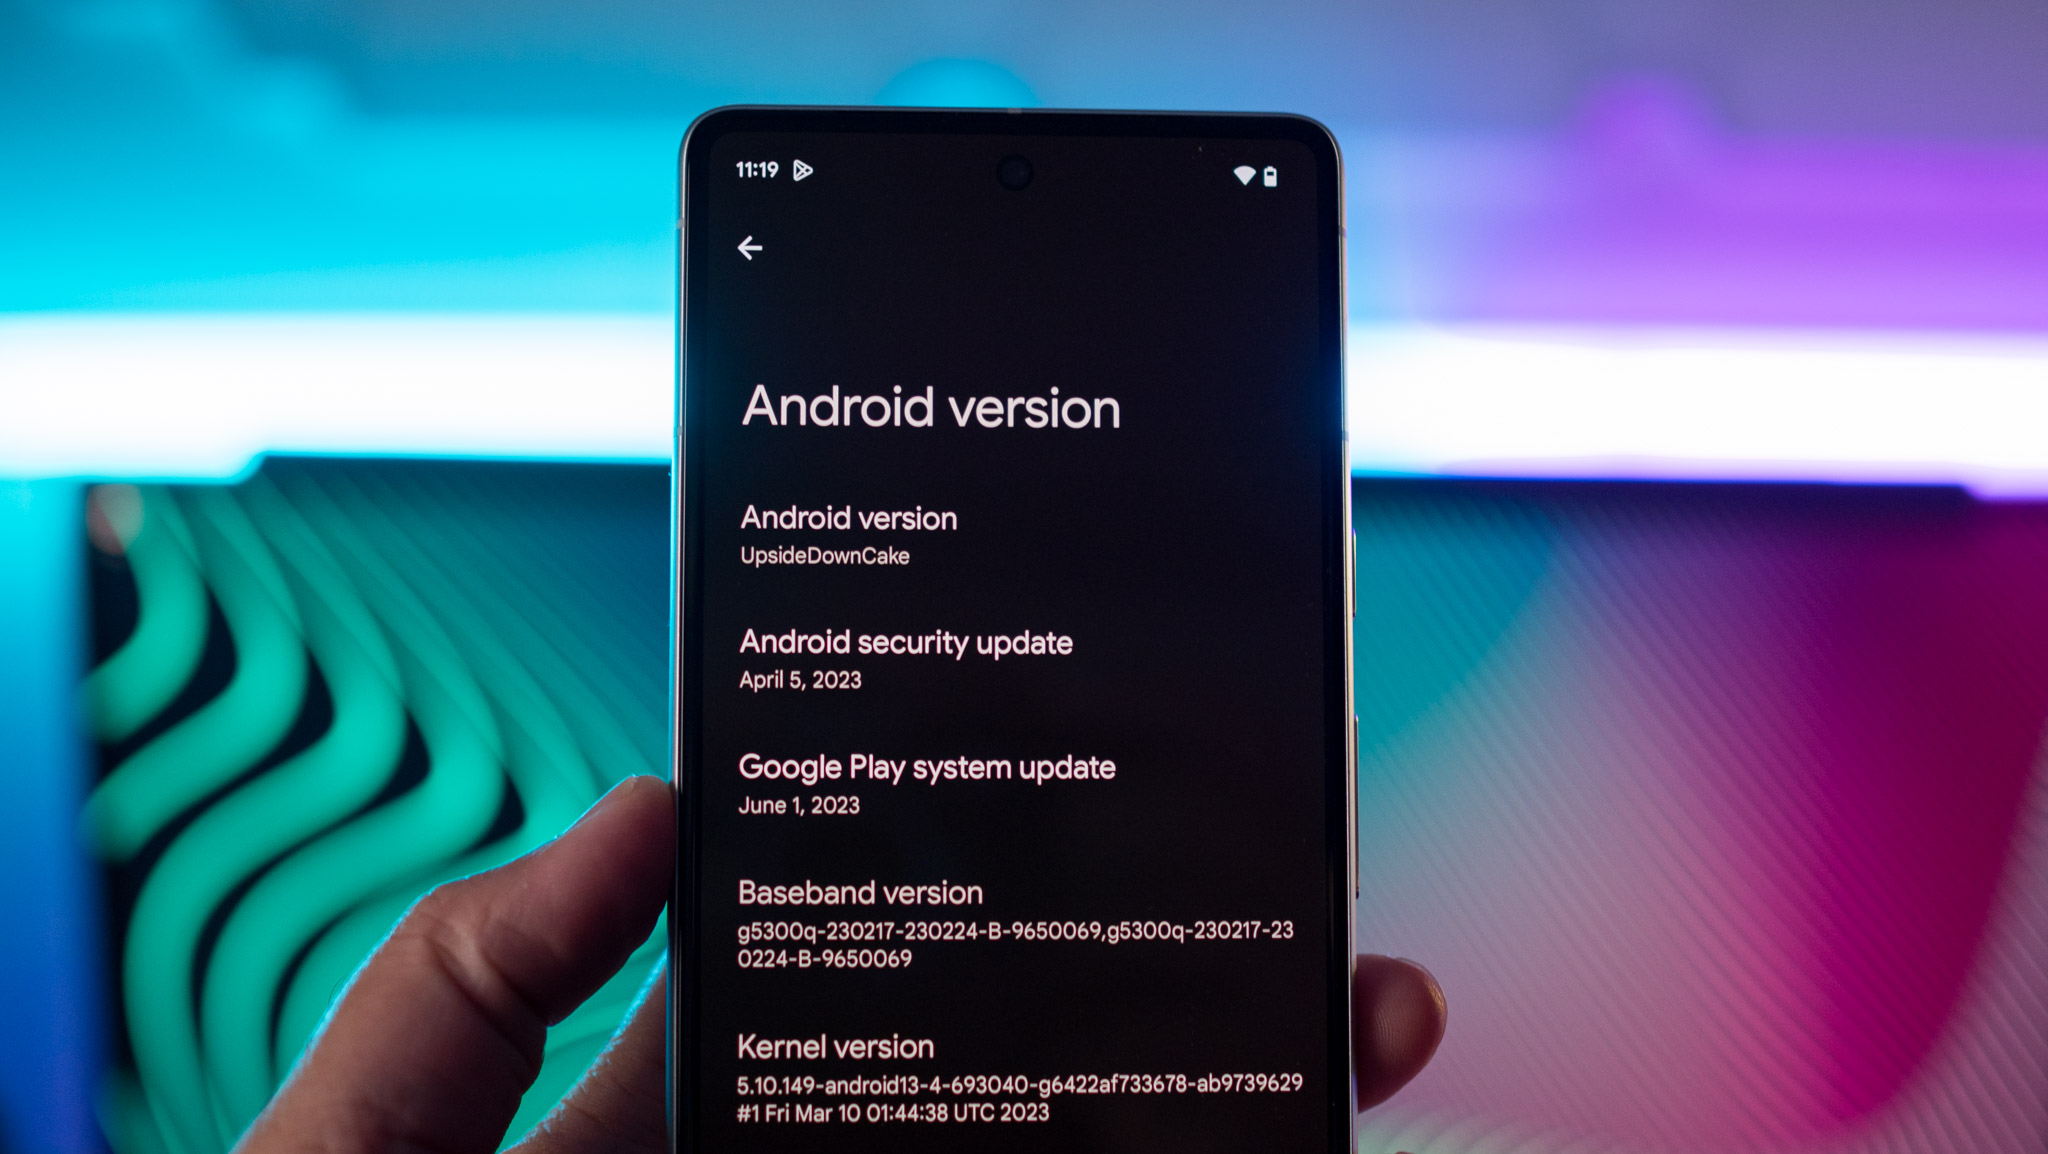 Android 14 version details in Pixel 7 settings